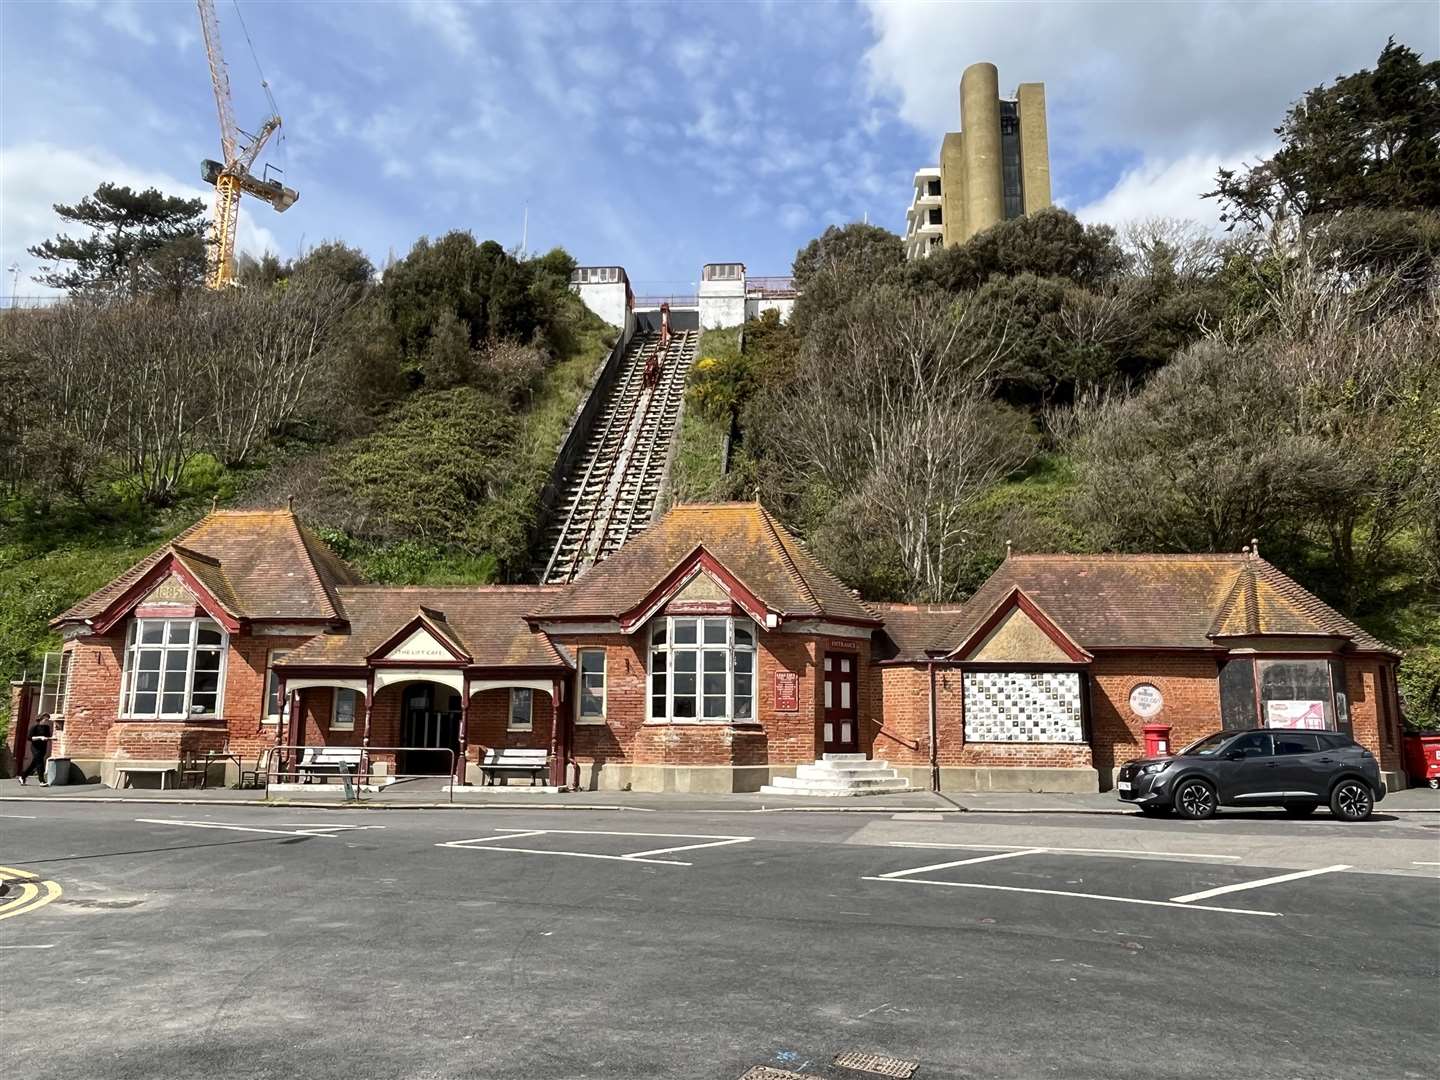 The Leas Lift in Folkestone is set to reopen in 2025 after a £6.6 million refurbishment takes place